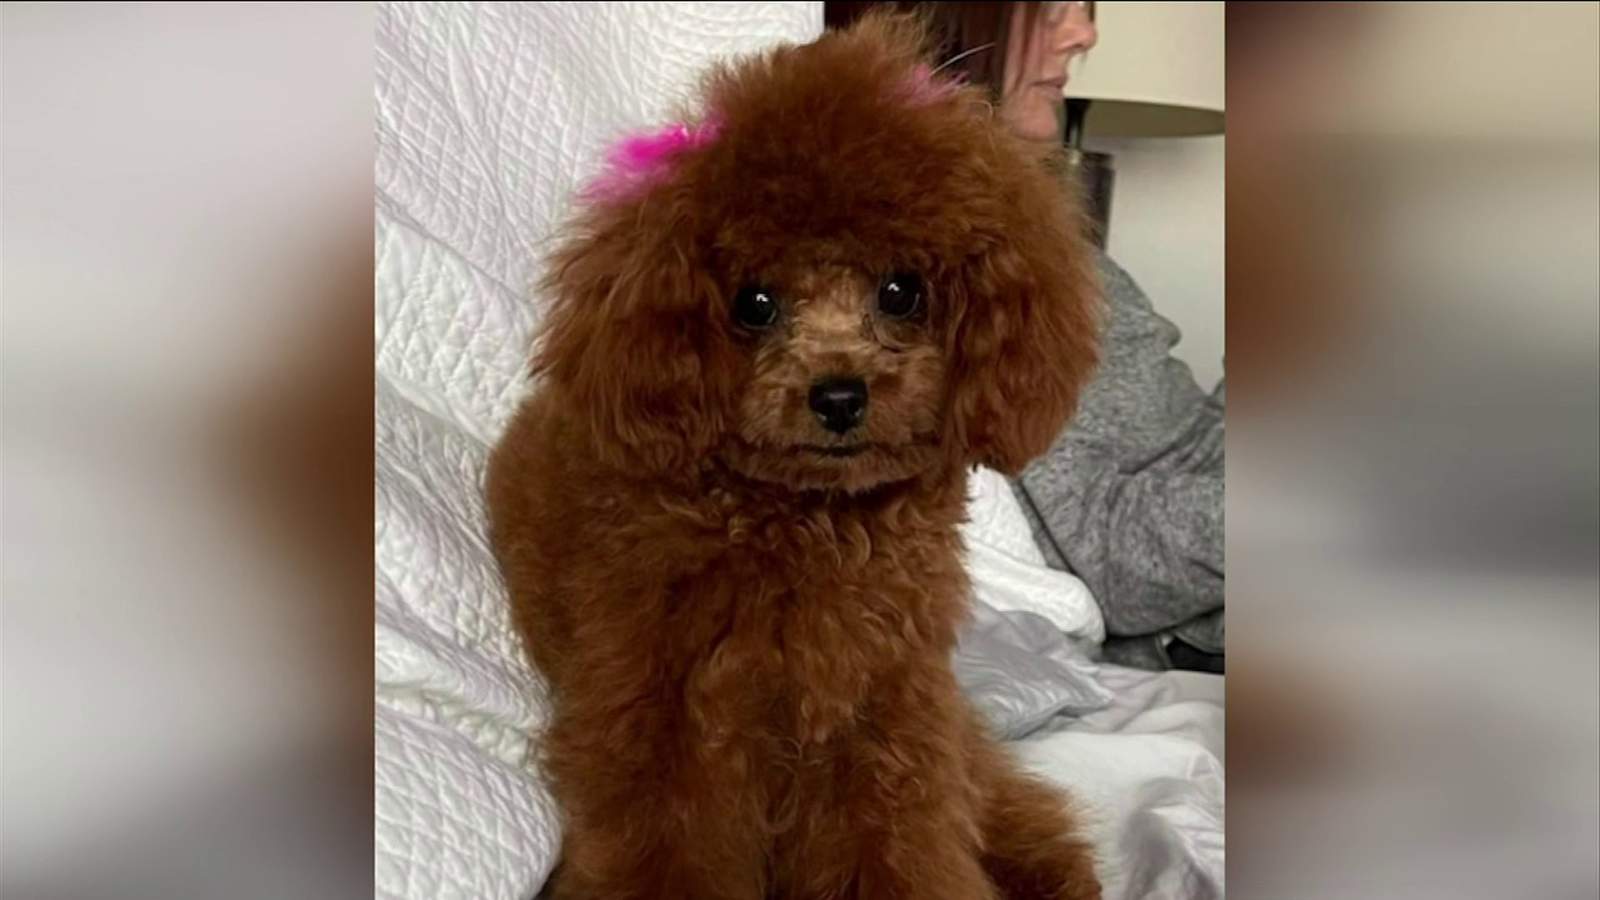 Food delivery driver accused of stealing teacup poodle puppy from Jacksonville Beach condo